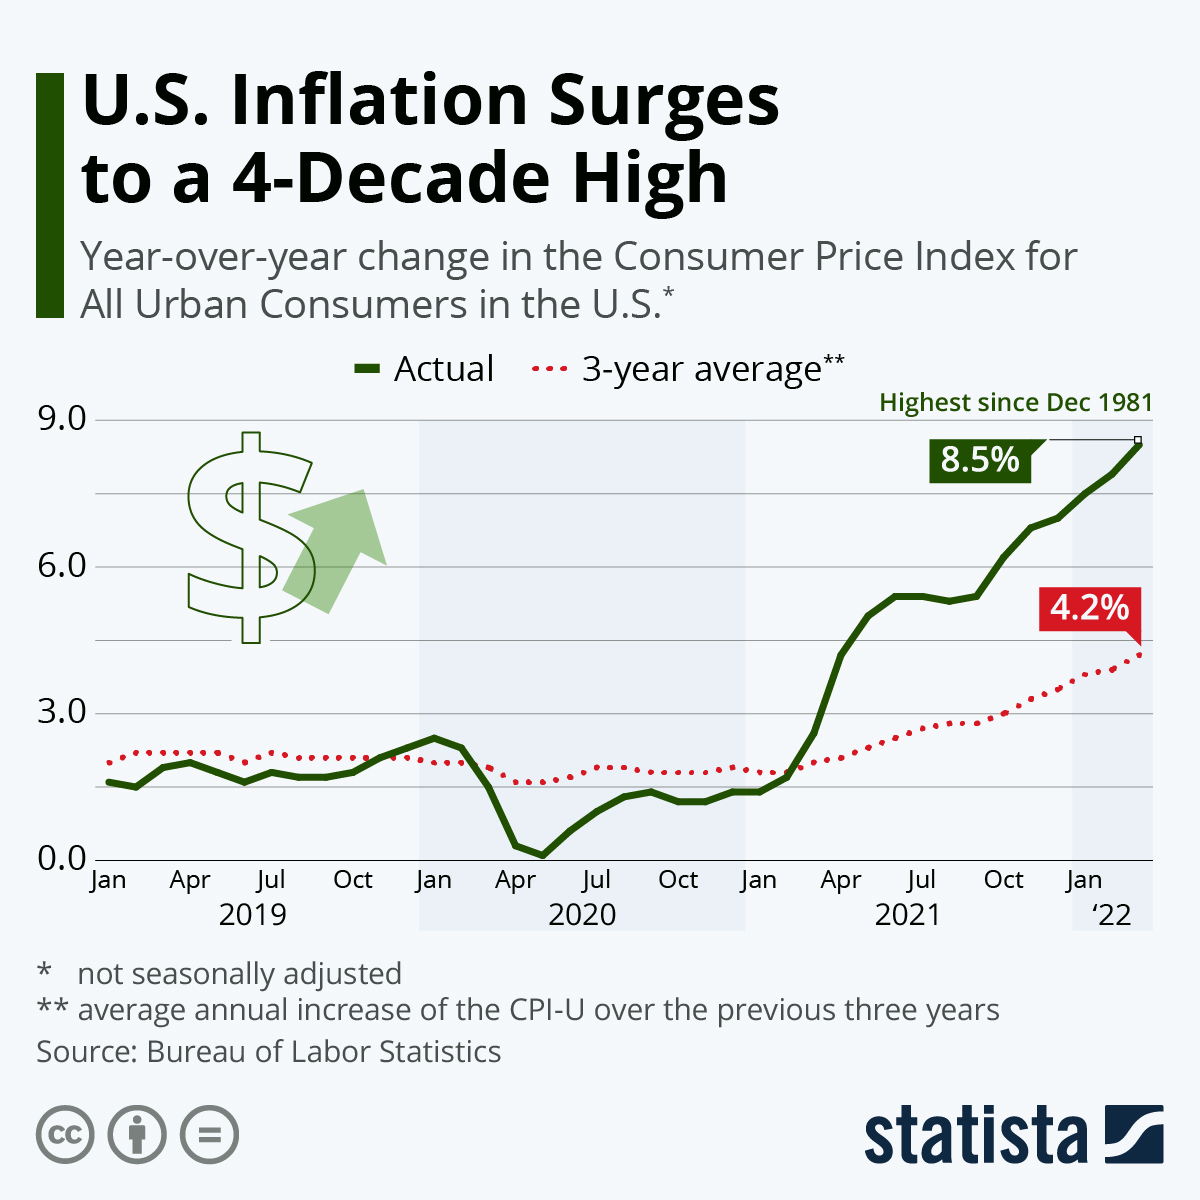 U.S. Inflation Surges to a 4-Decade High